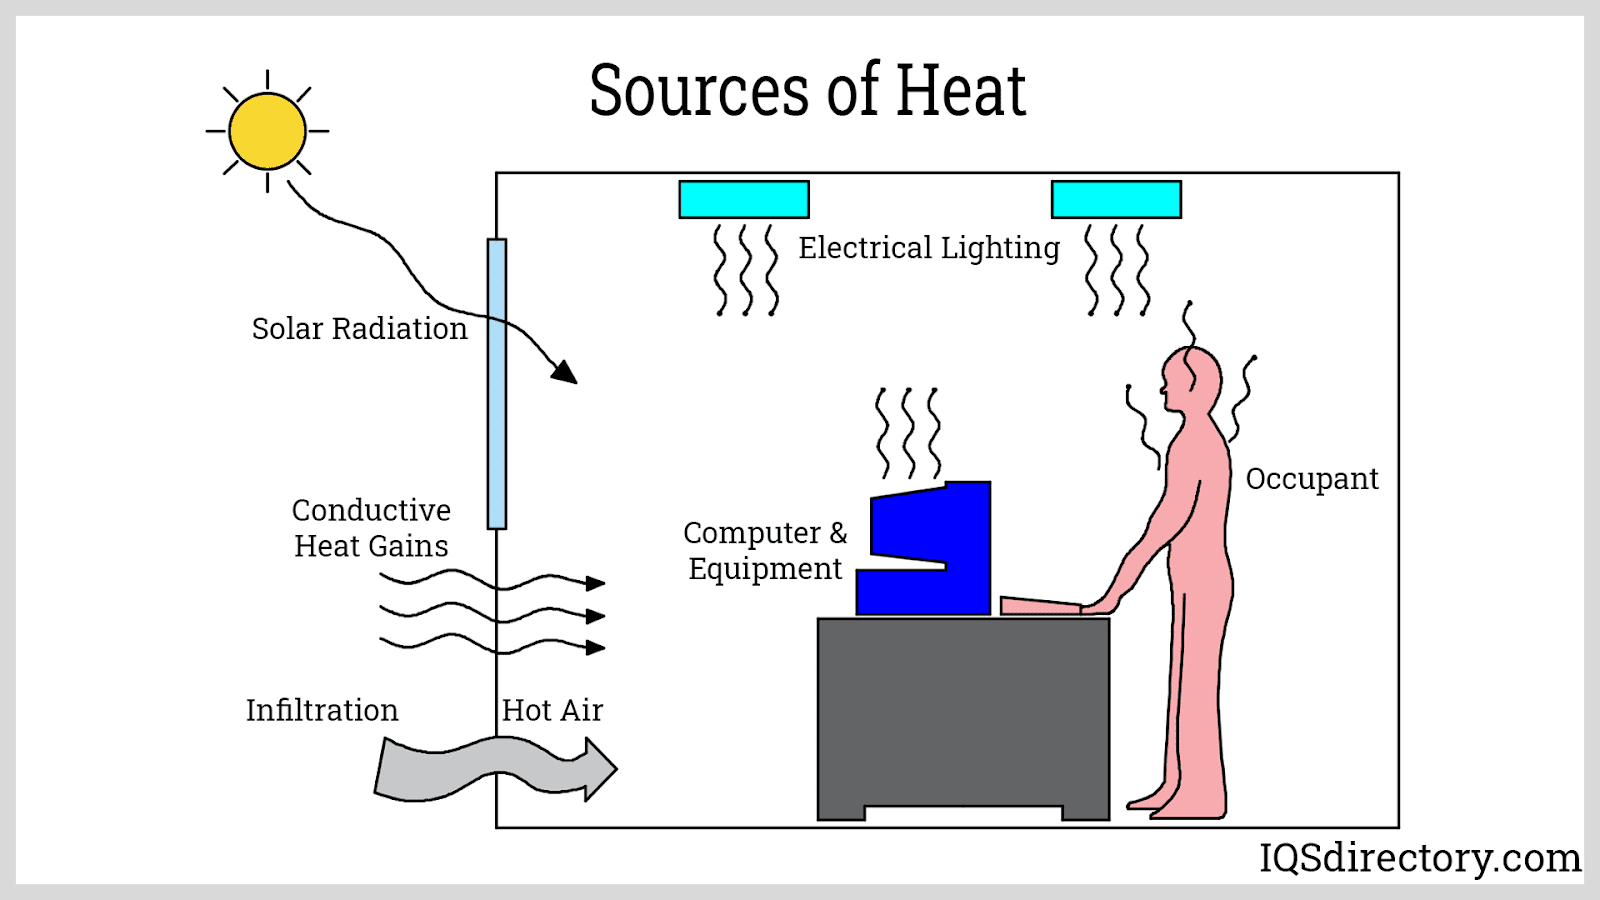 Sources of Heat